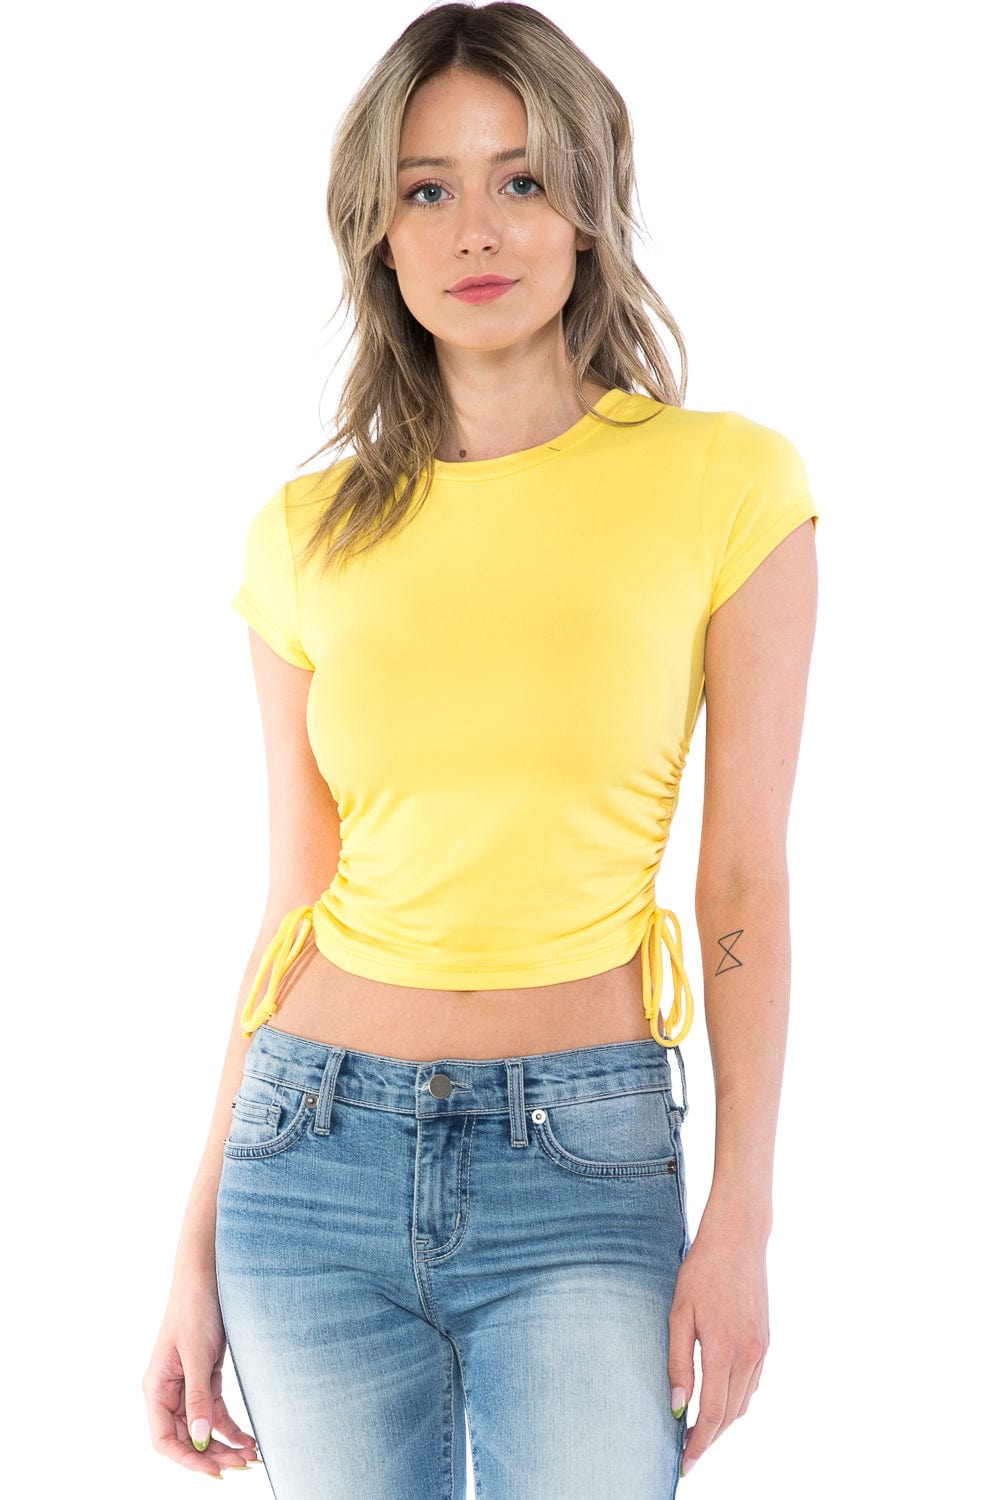 Auliné Collection Shirts & Tops Small / Yellow Womens Trendy Solid Color Soft Basic Ruched Tie Crop Top